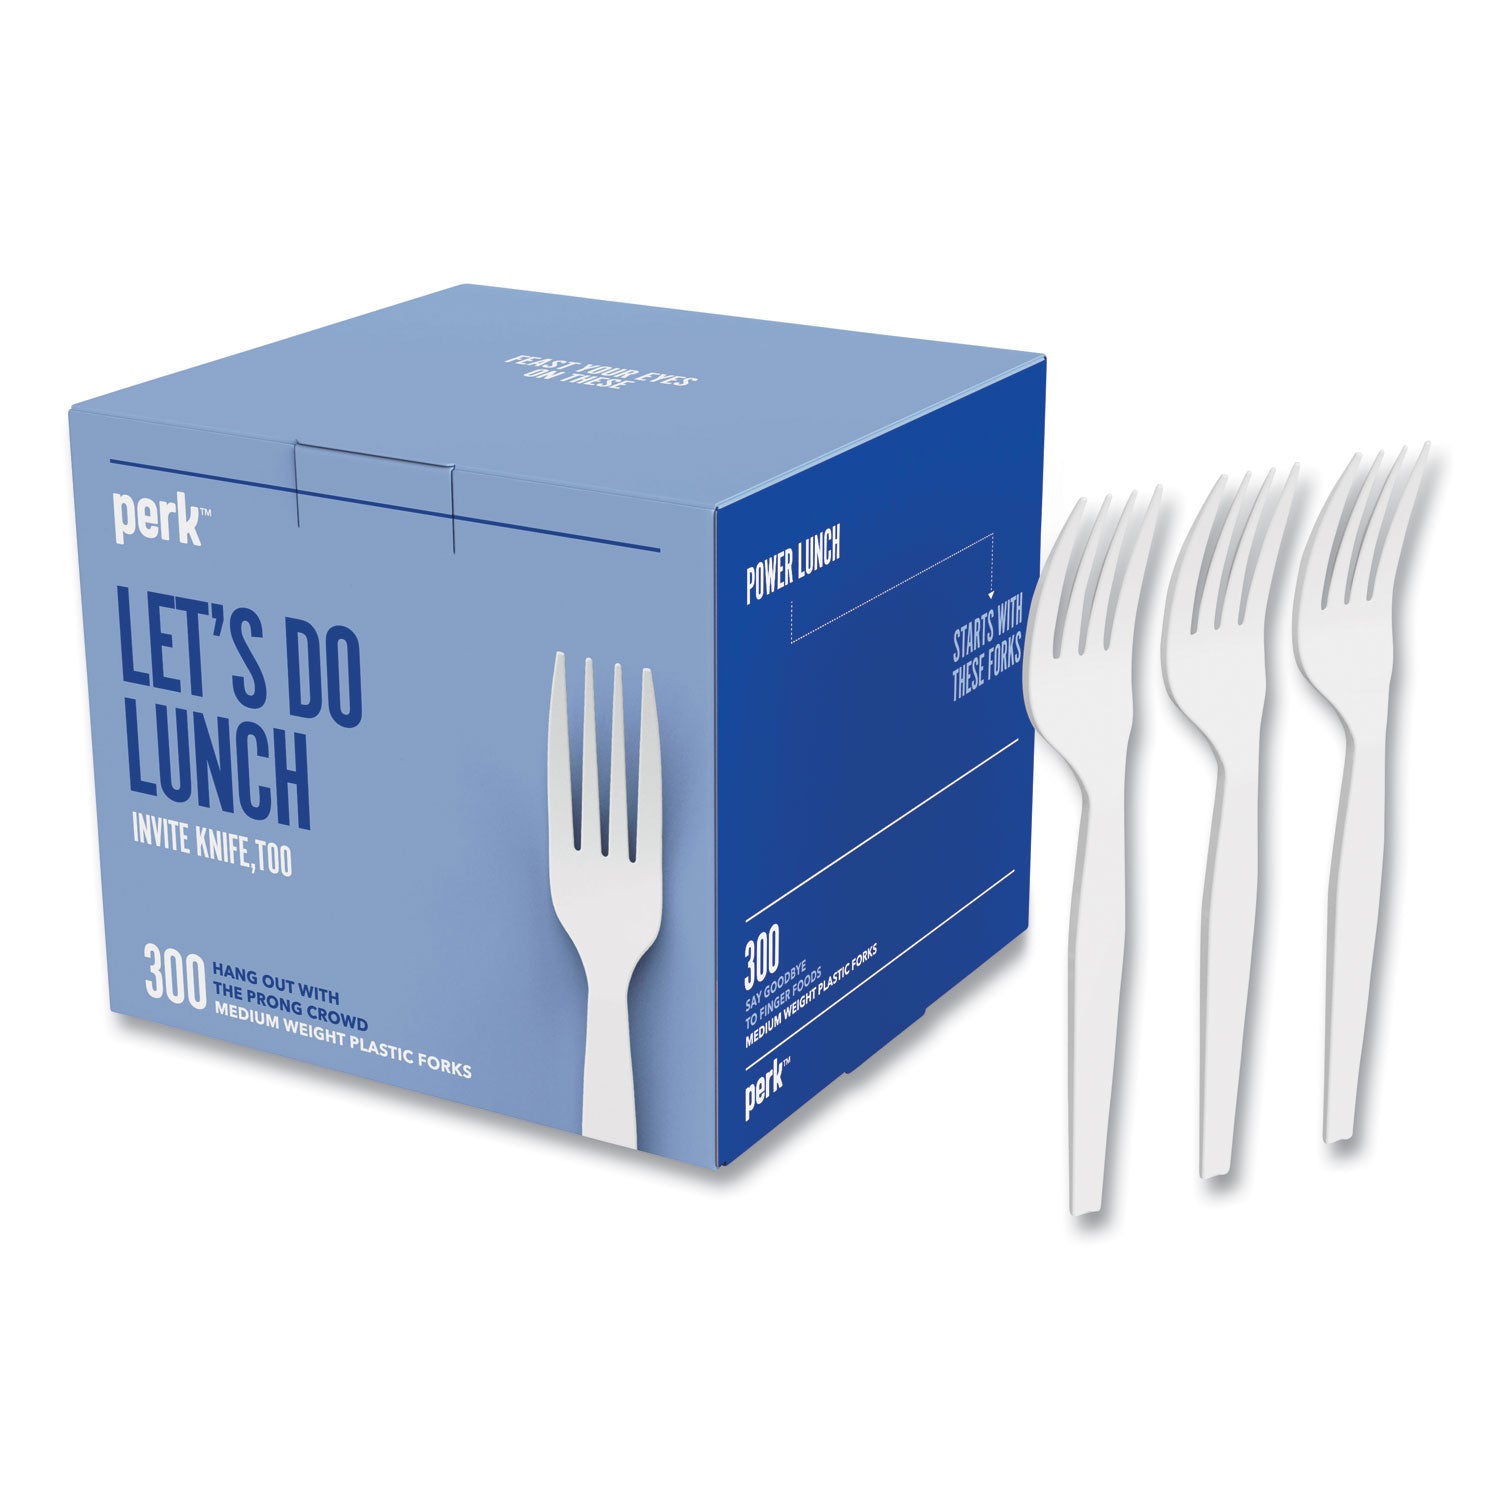 eco-id-mediumweight-compostable-cutlery-fork-white-300-pack_prk24394114 - 1